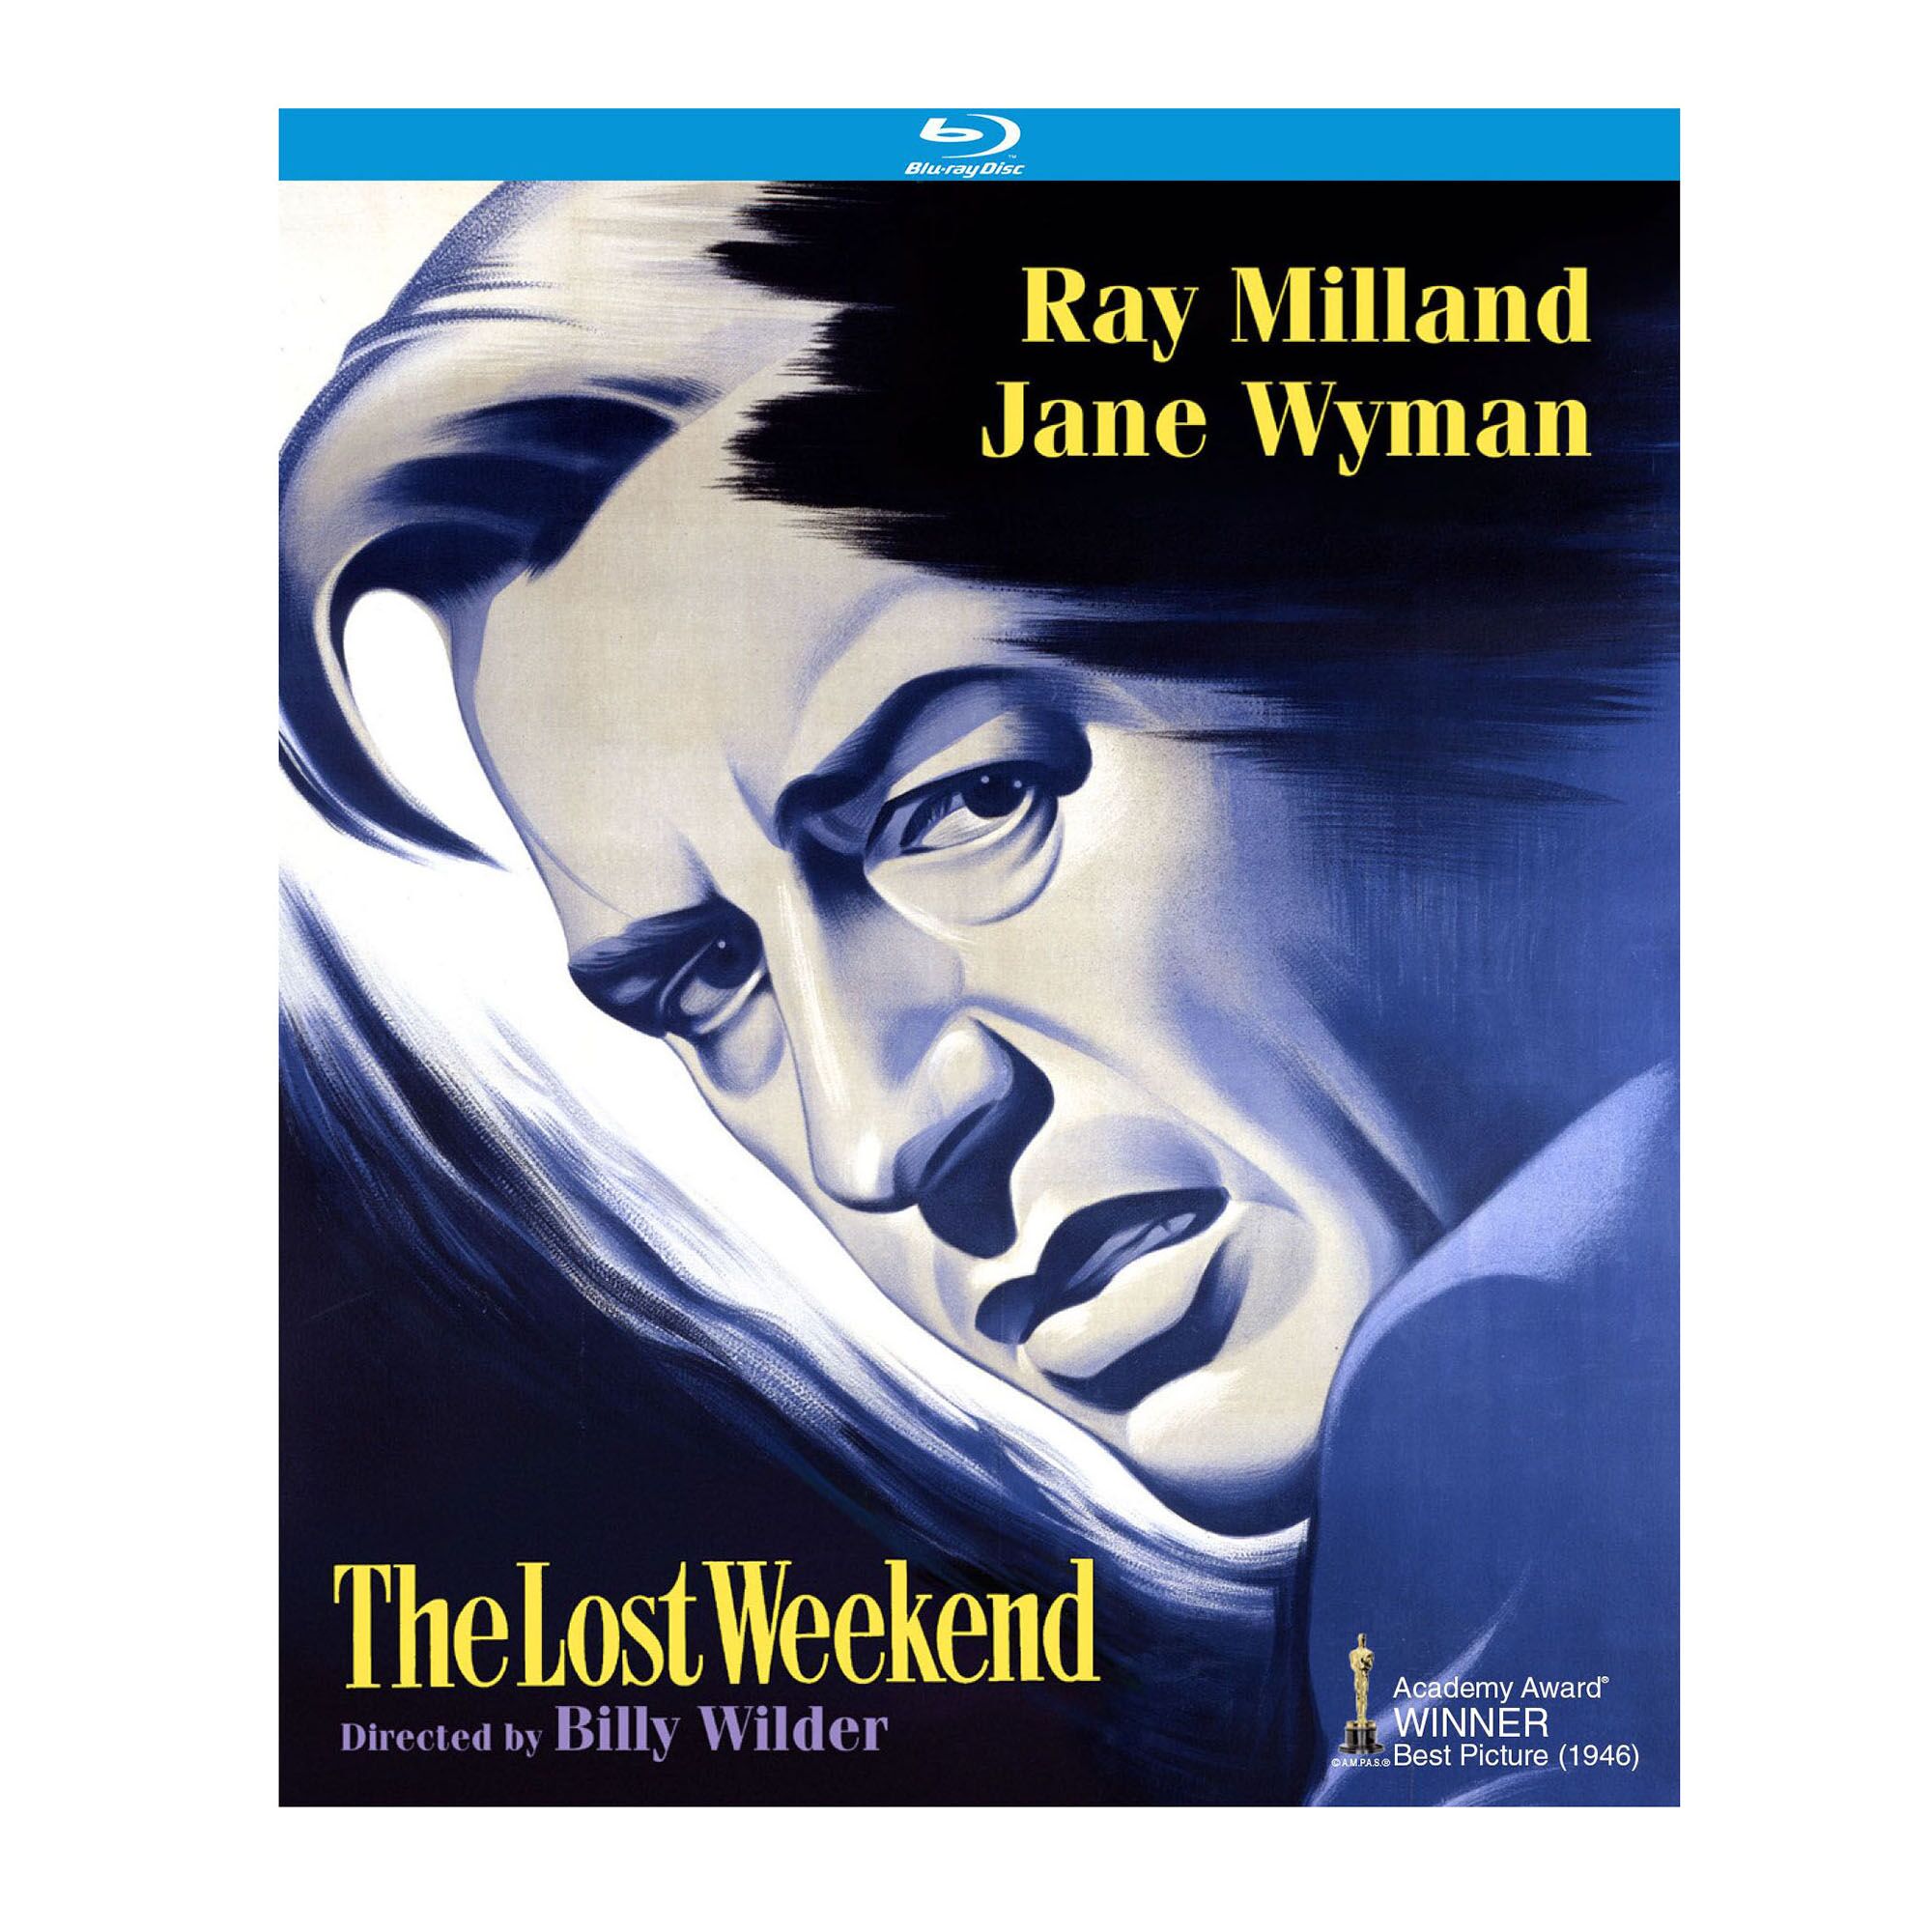 Blue Ray Disc cover of the movie The Lost Weekend